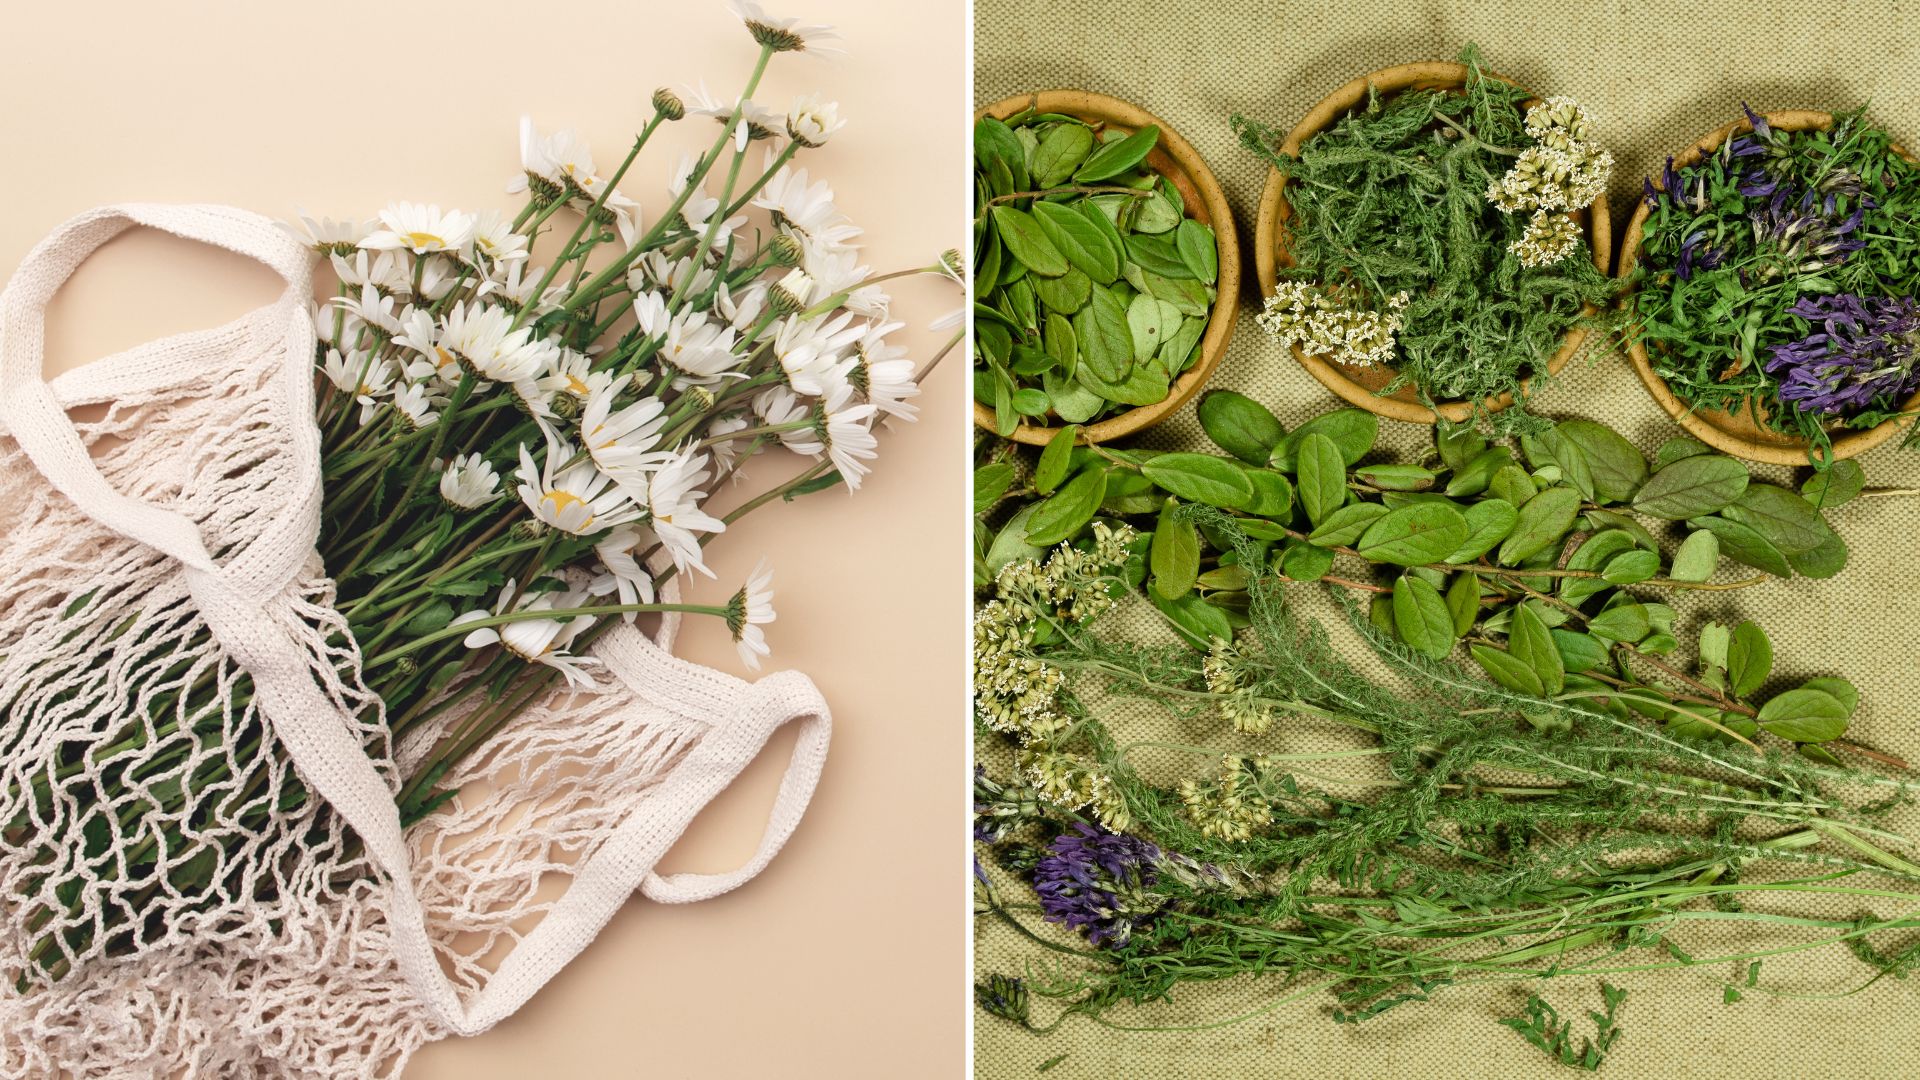 Here’s How To Easily Dry Your Homegrown Herbs With One Laundry Room Essential